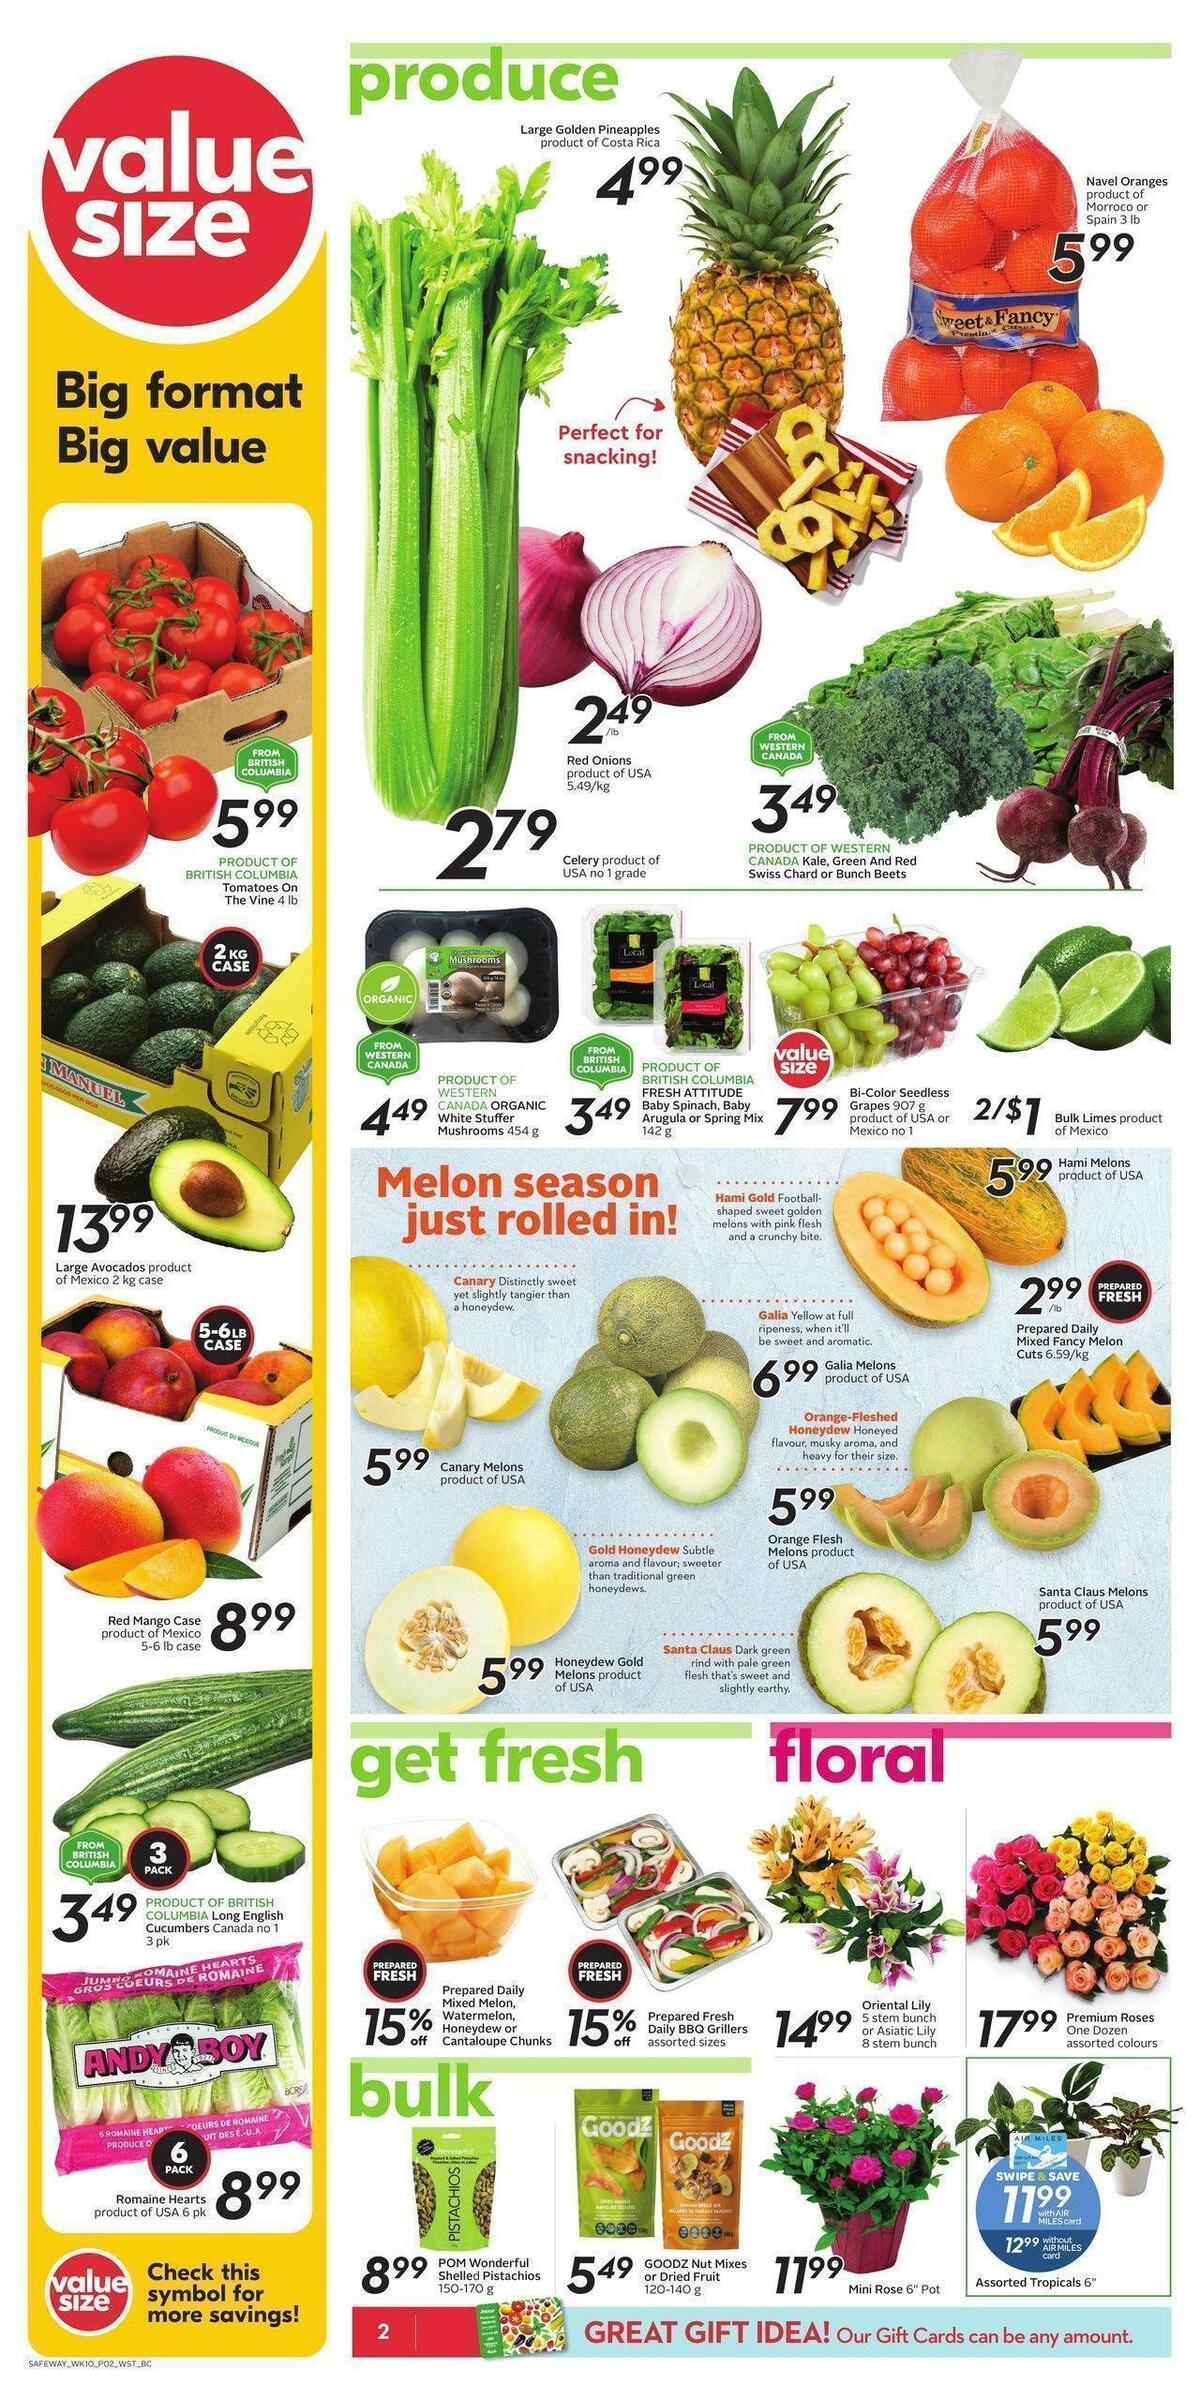 Safeway Flyer from July 7